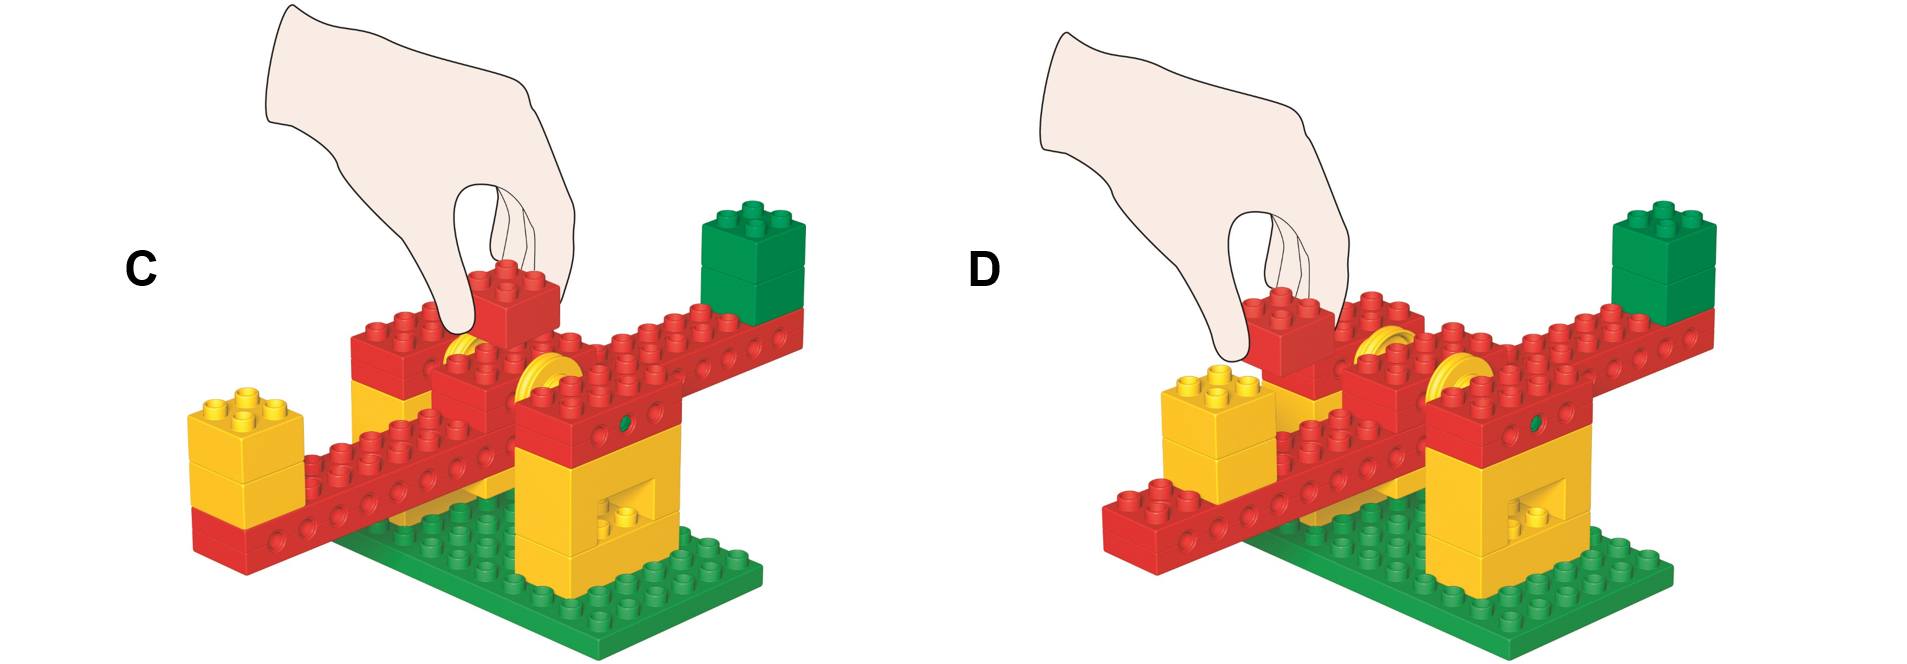 Seesaw - Early Simple Machines - Lesson Plans - LEGO Education